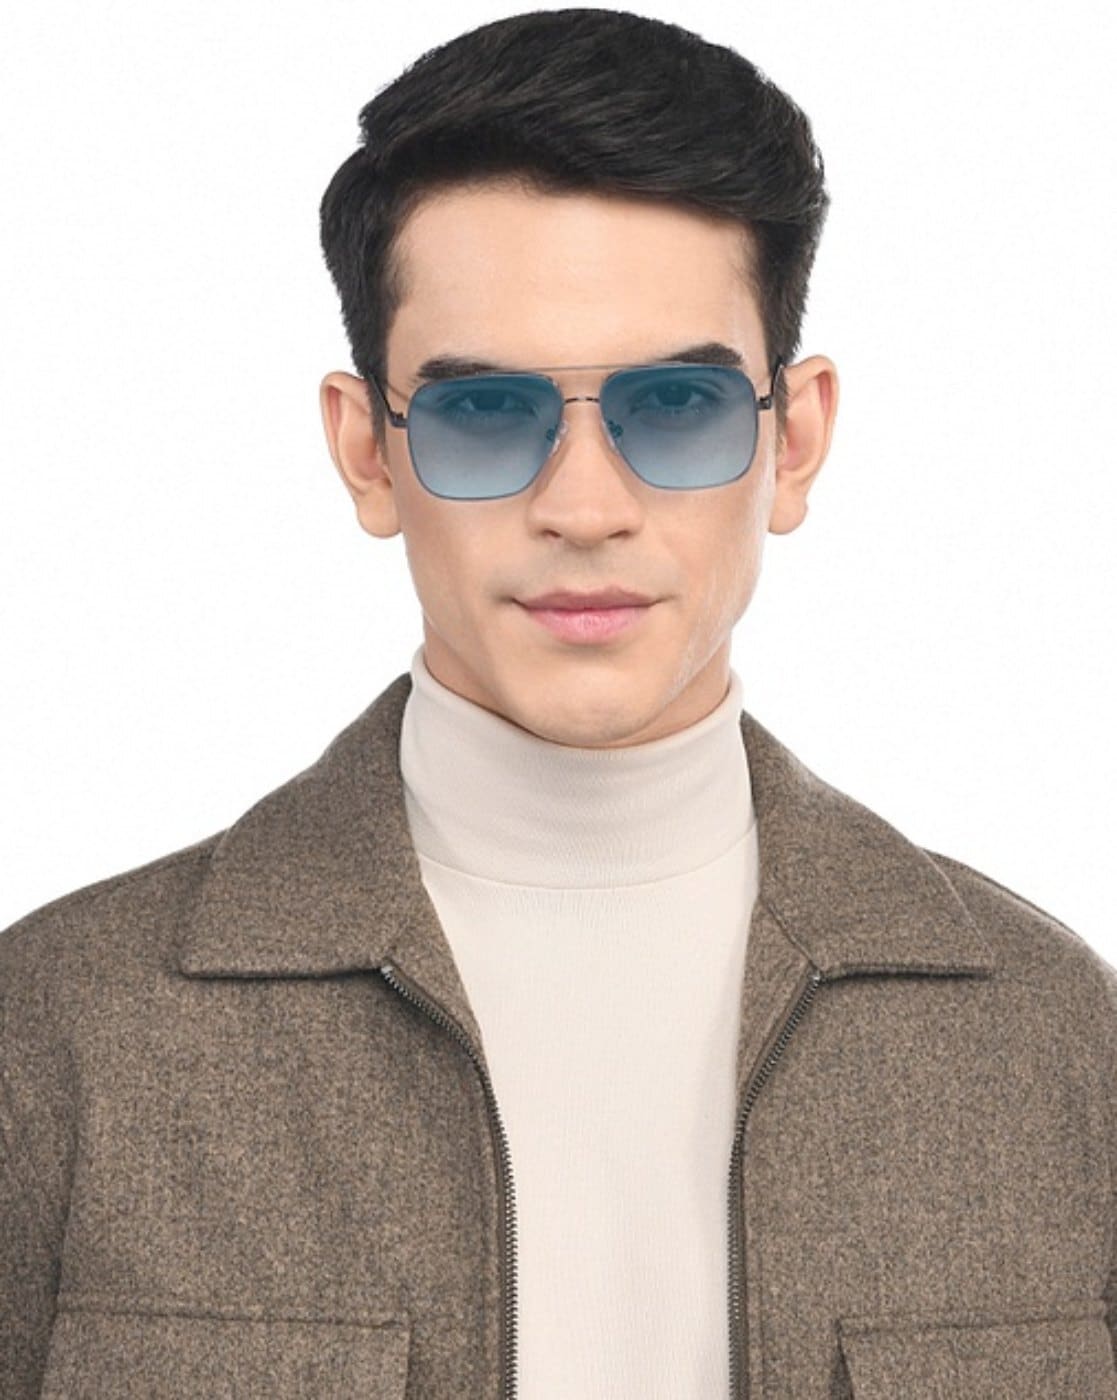 Buy Blue Sunglasses for Men by Vincent Chase Online